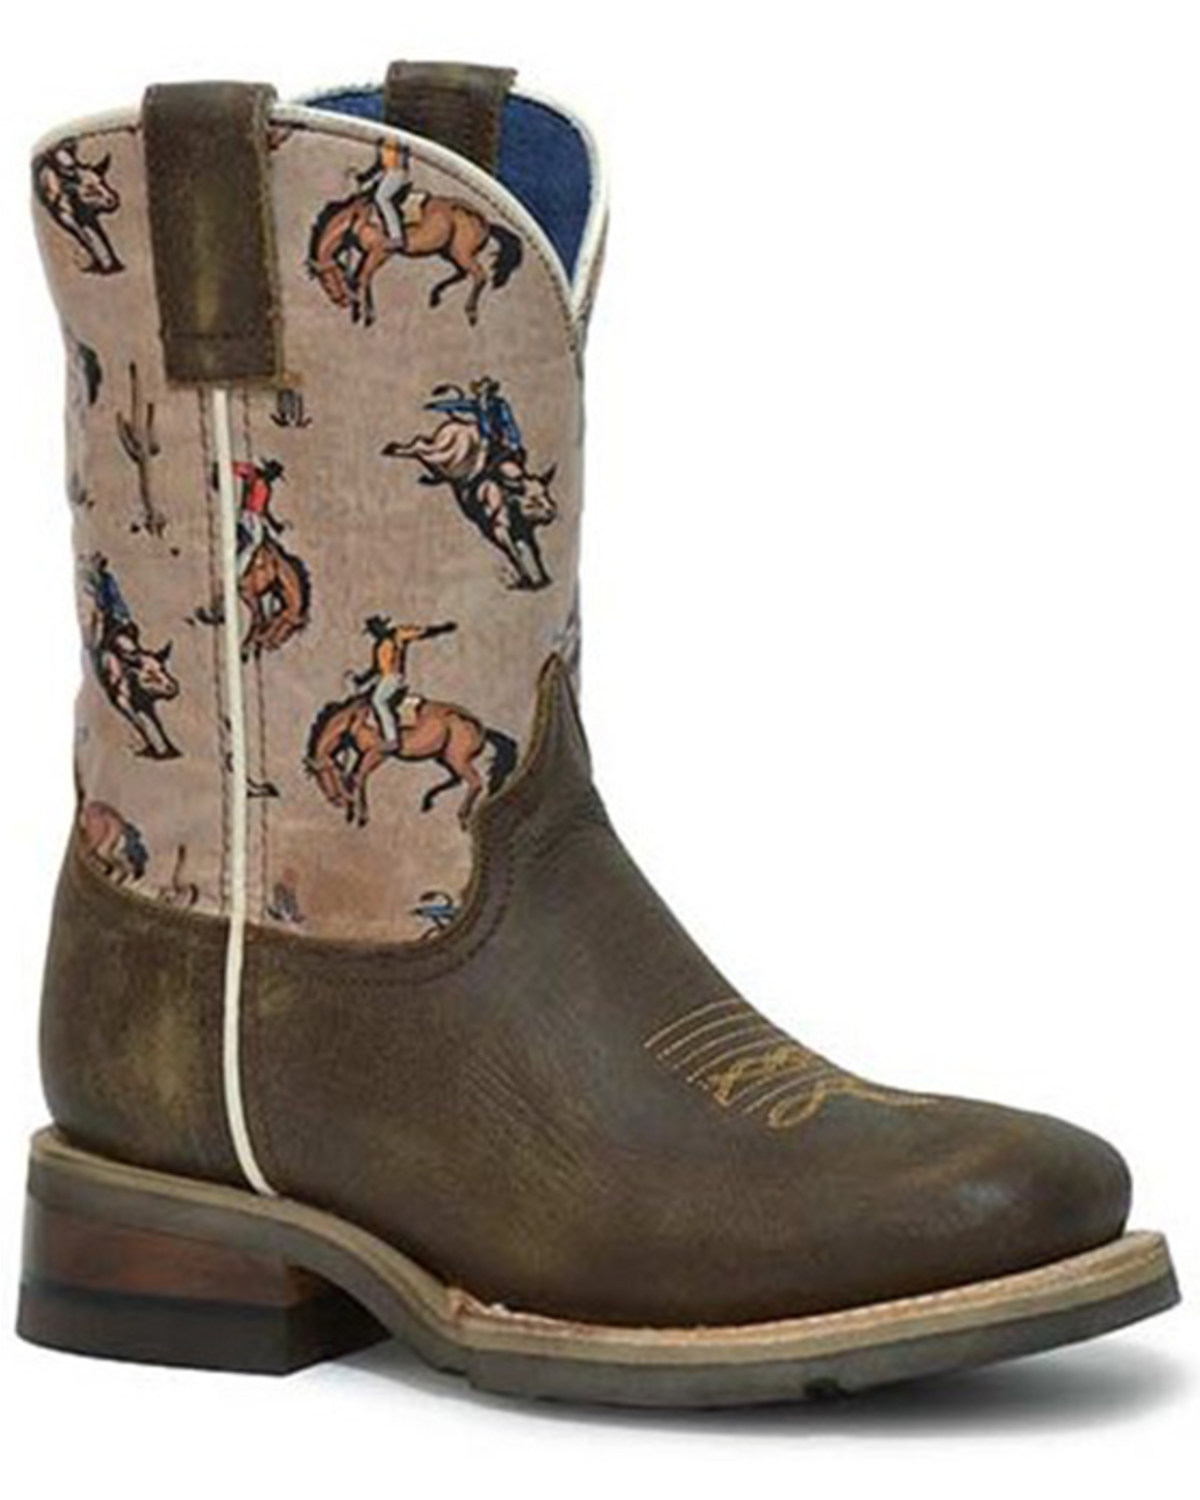 Roper Boys' Roughstock Western Boots - Square Toe